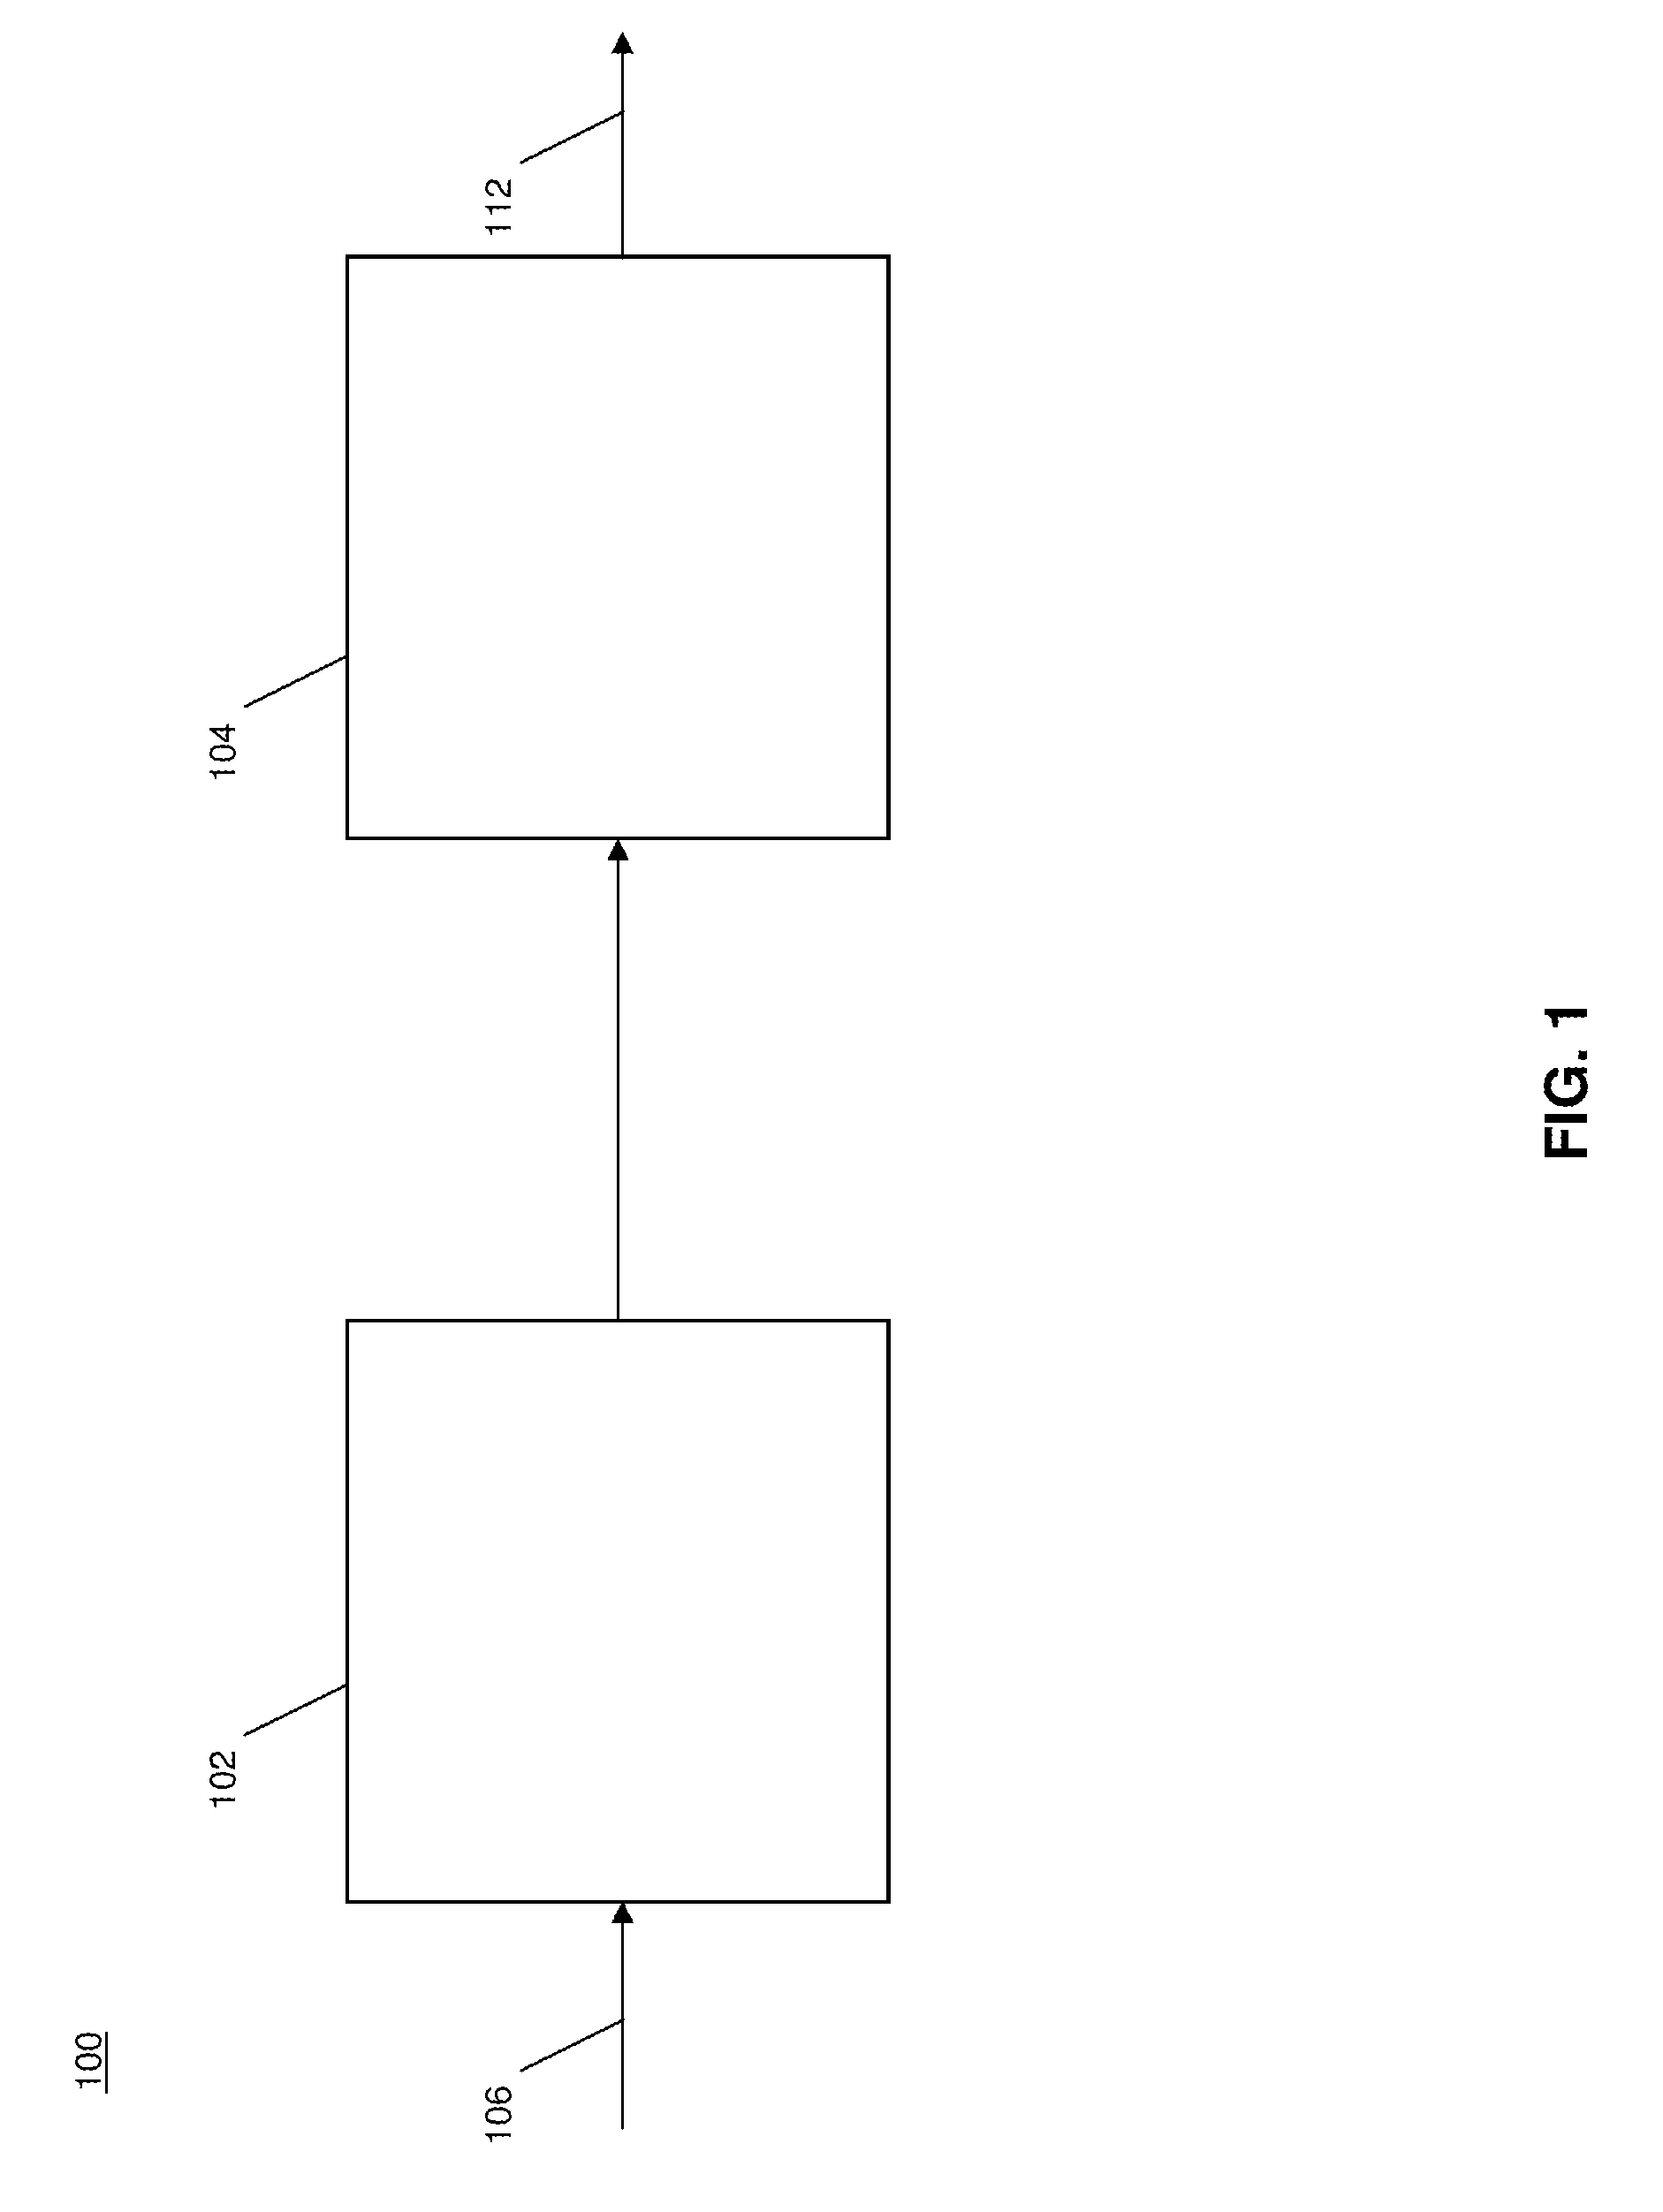 Suspended media membrane biological reactor system and process including suspension system and multiple biological reactor zones